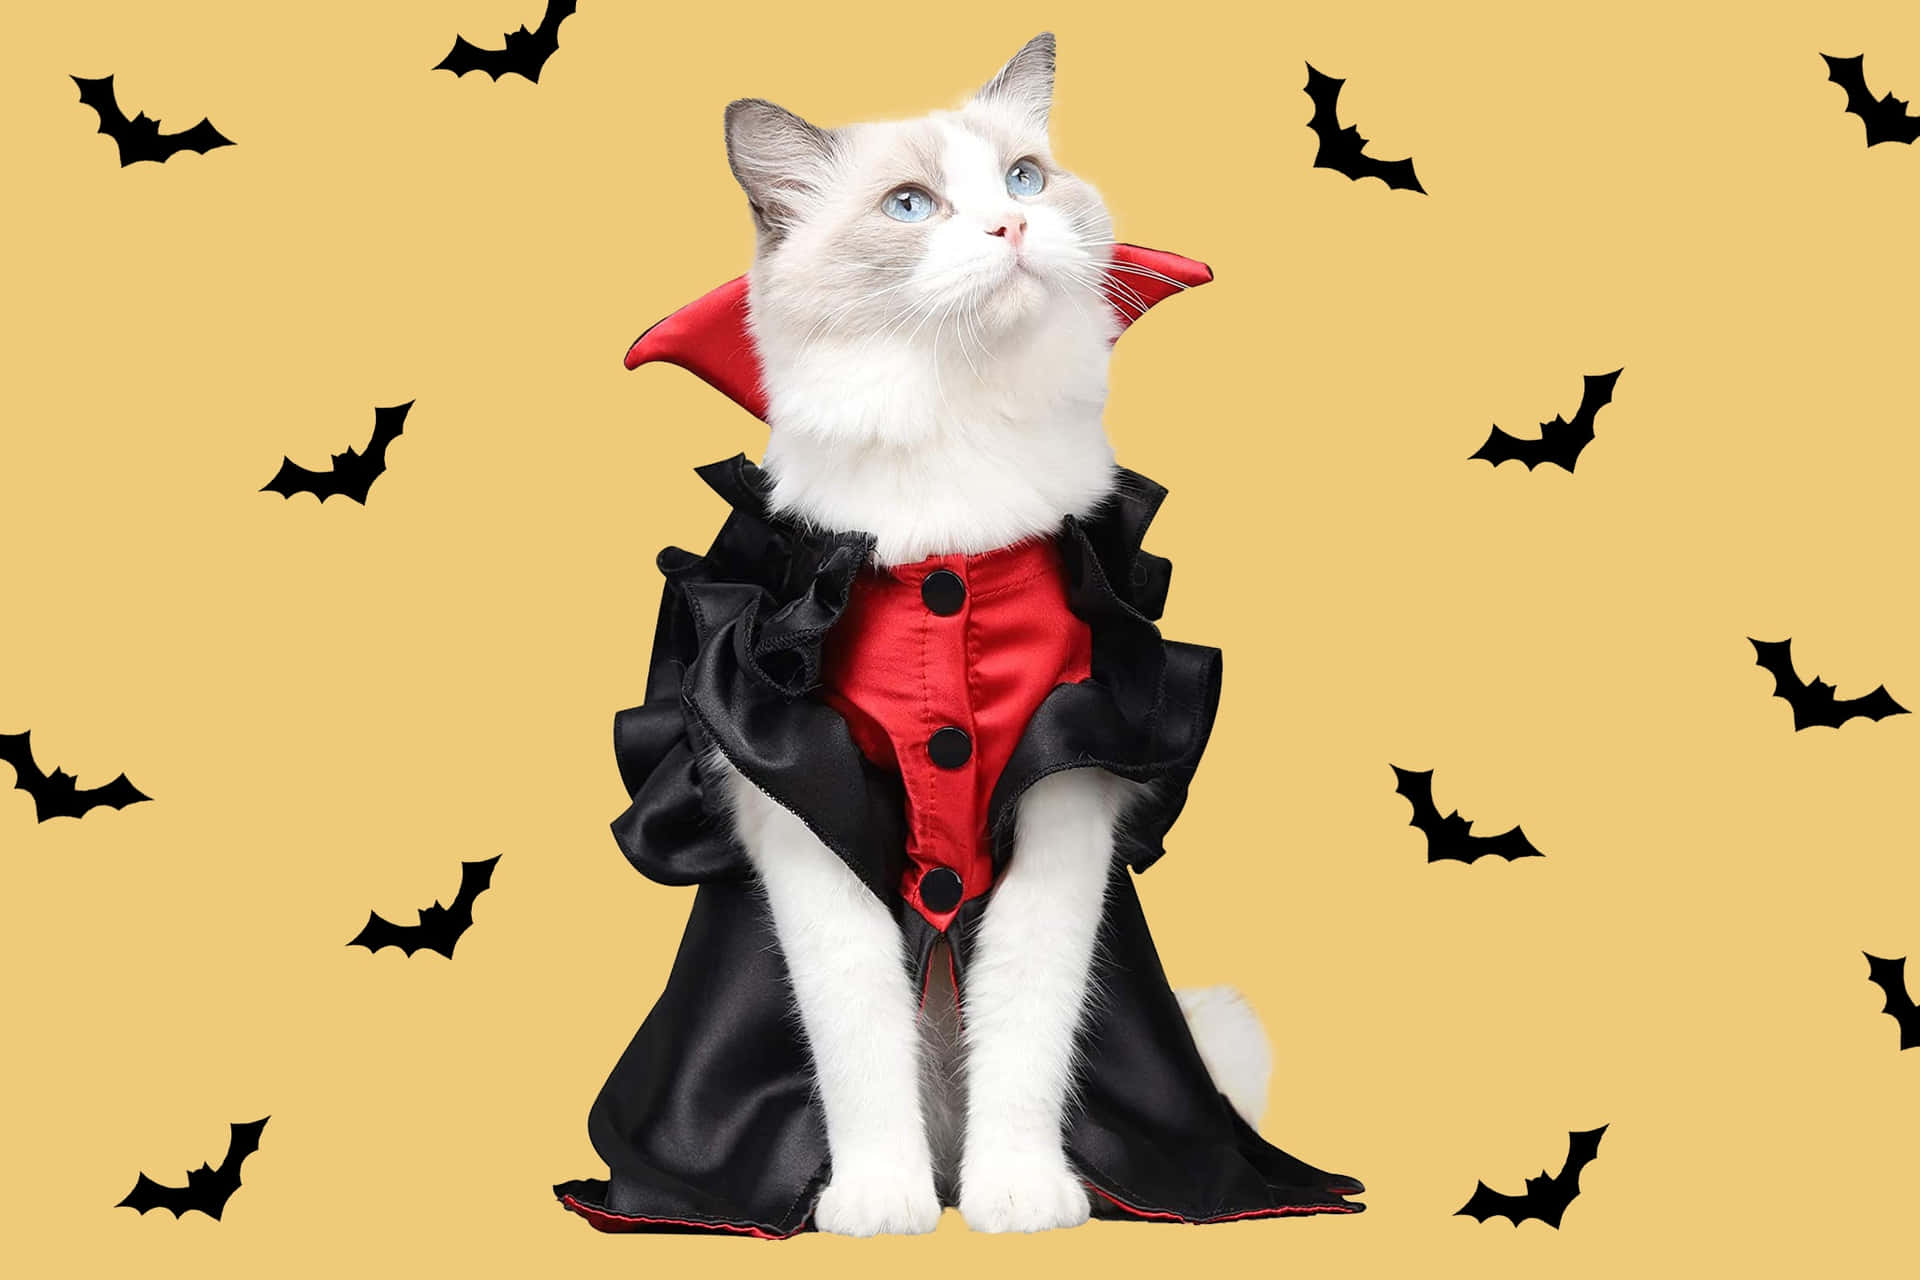 Happy Halloween from our spooky black cat! Wallpaper